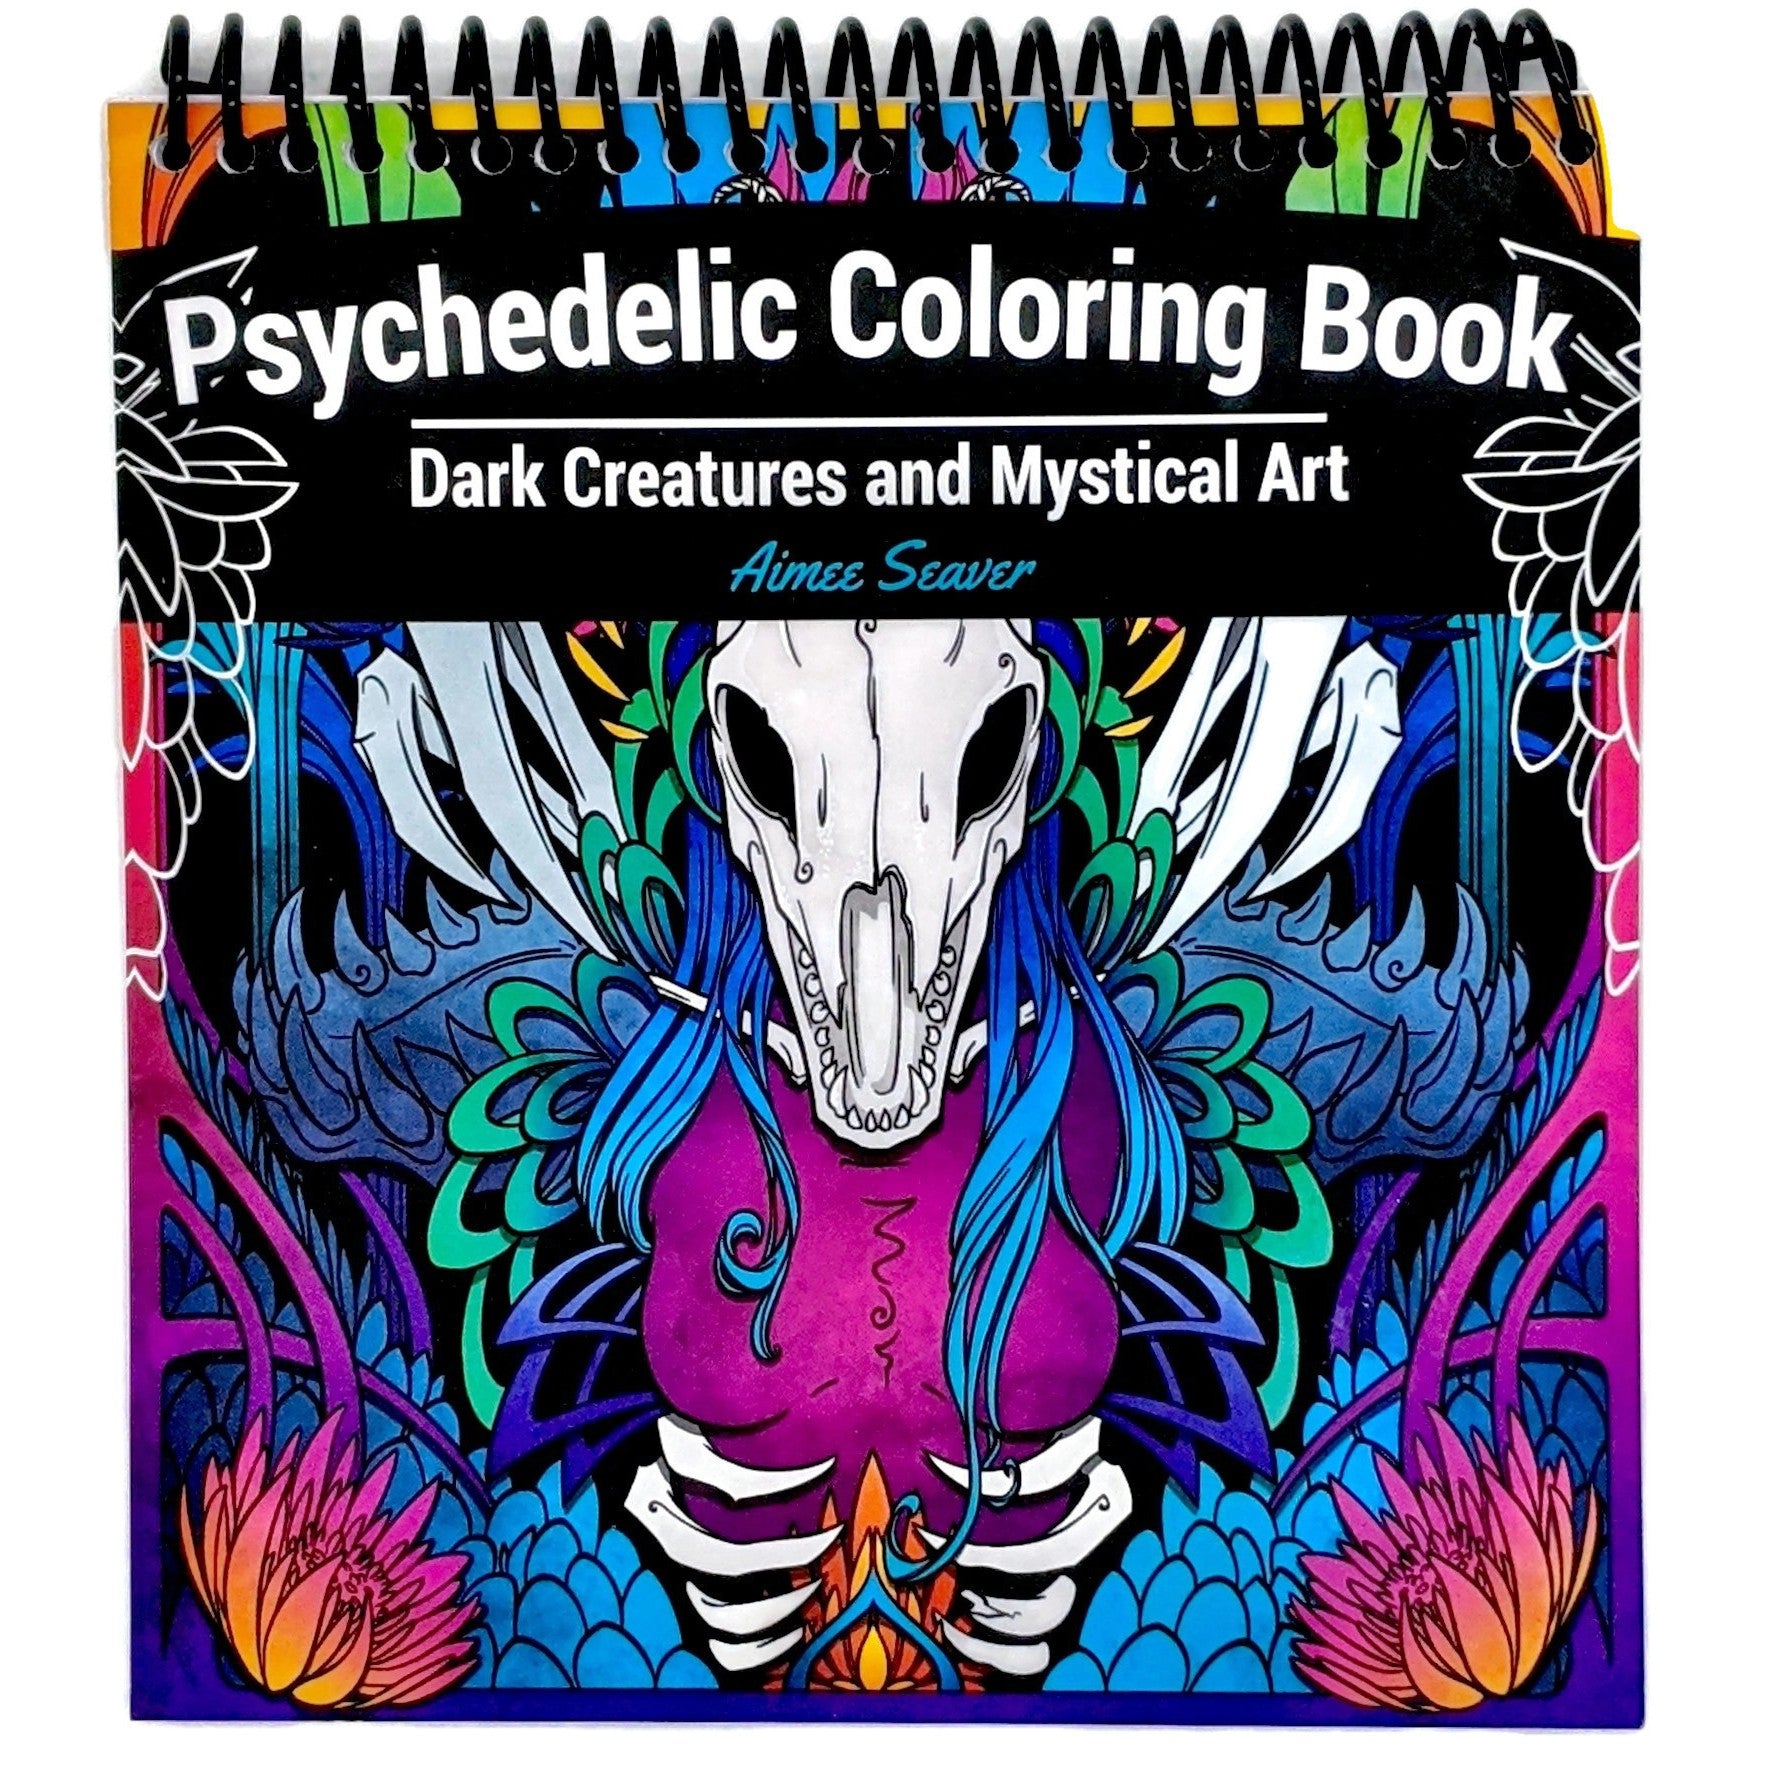 Psychedelic Coloring Book: Dark Creatures and Mystical Art – Ninefold Design